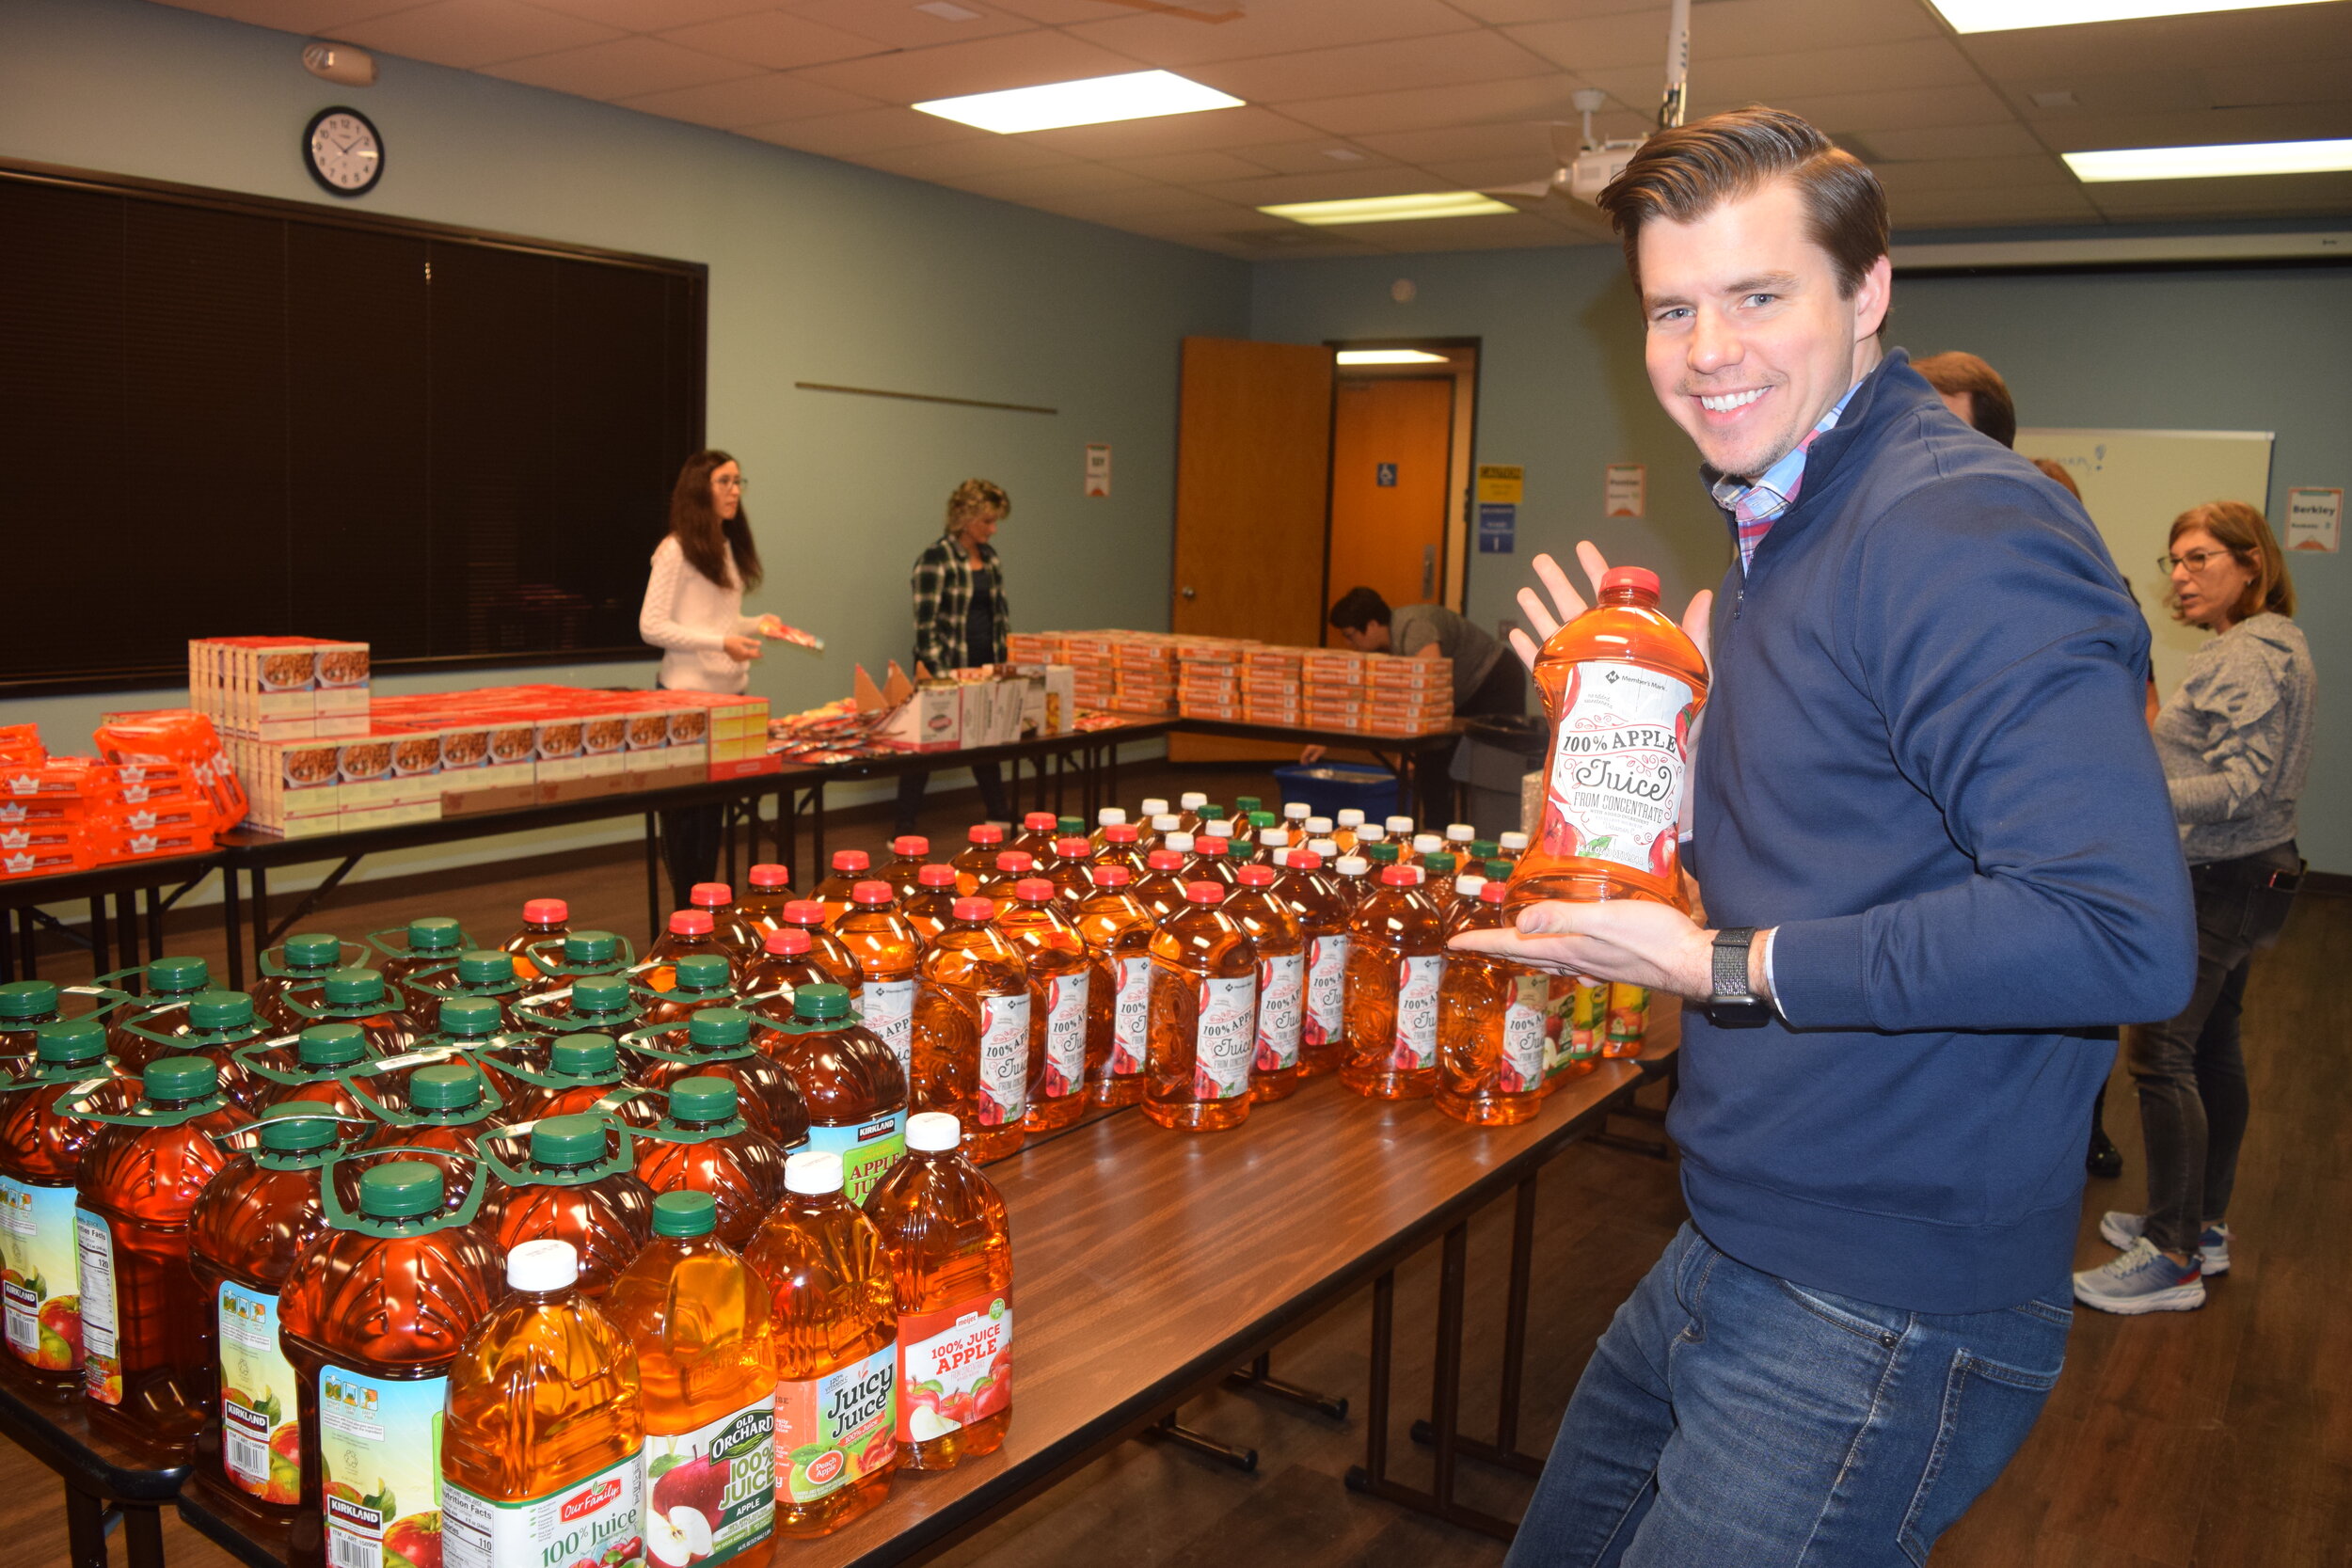 Volunteers placed apple juice in Thanksgiving baskets for families to enjoy.